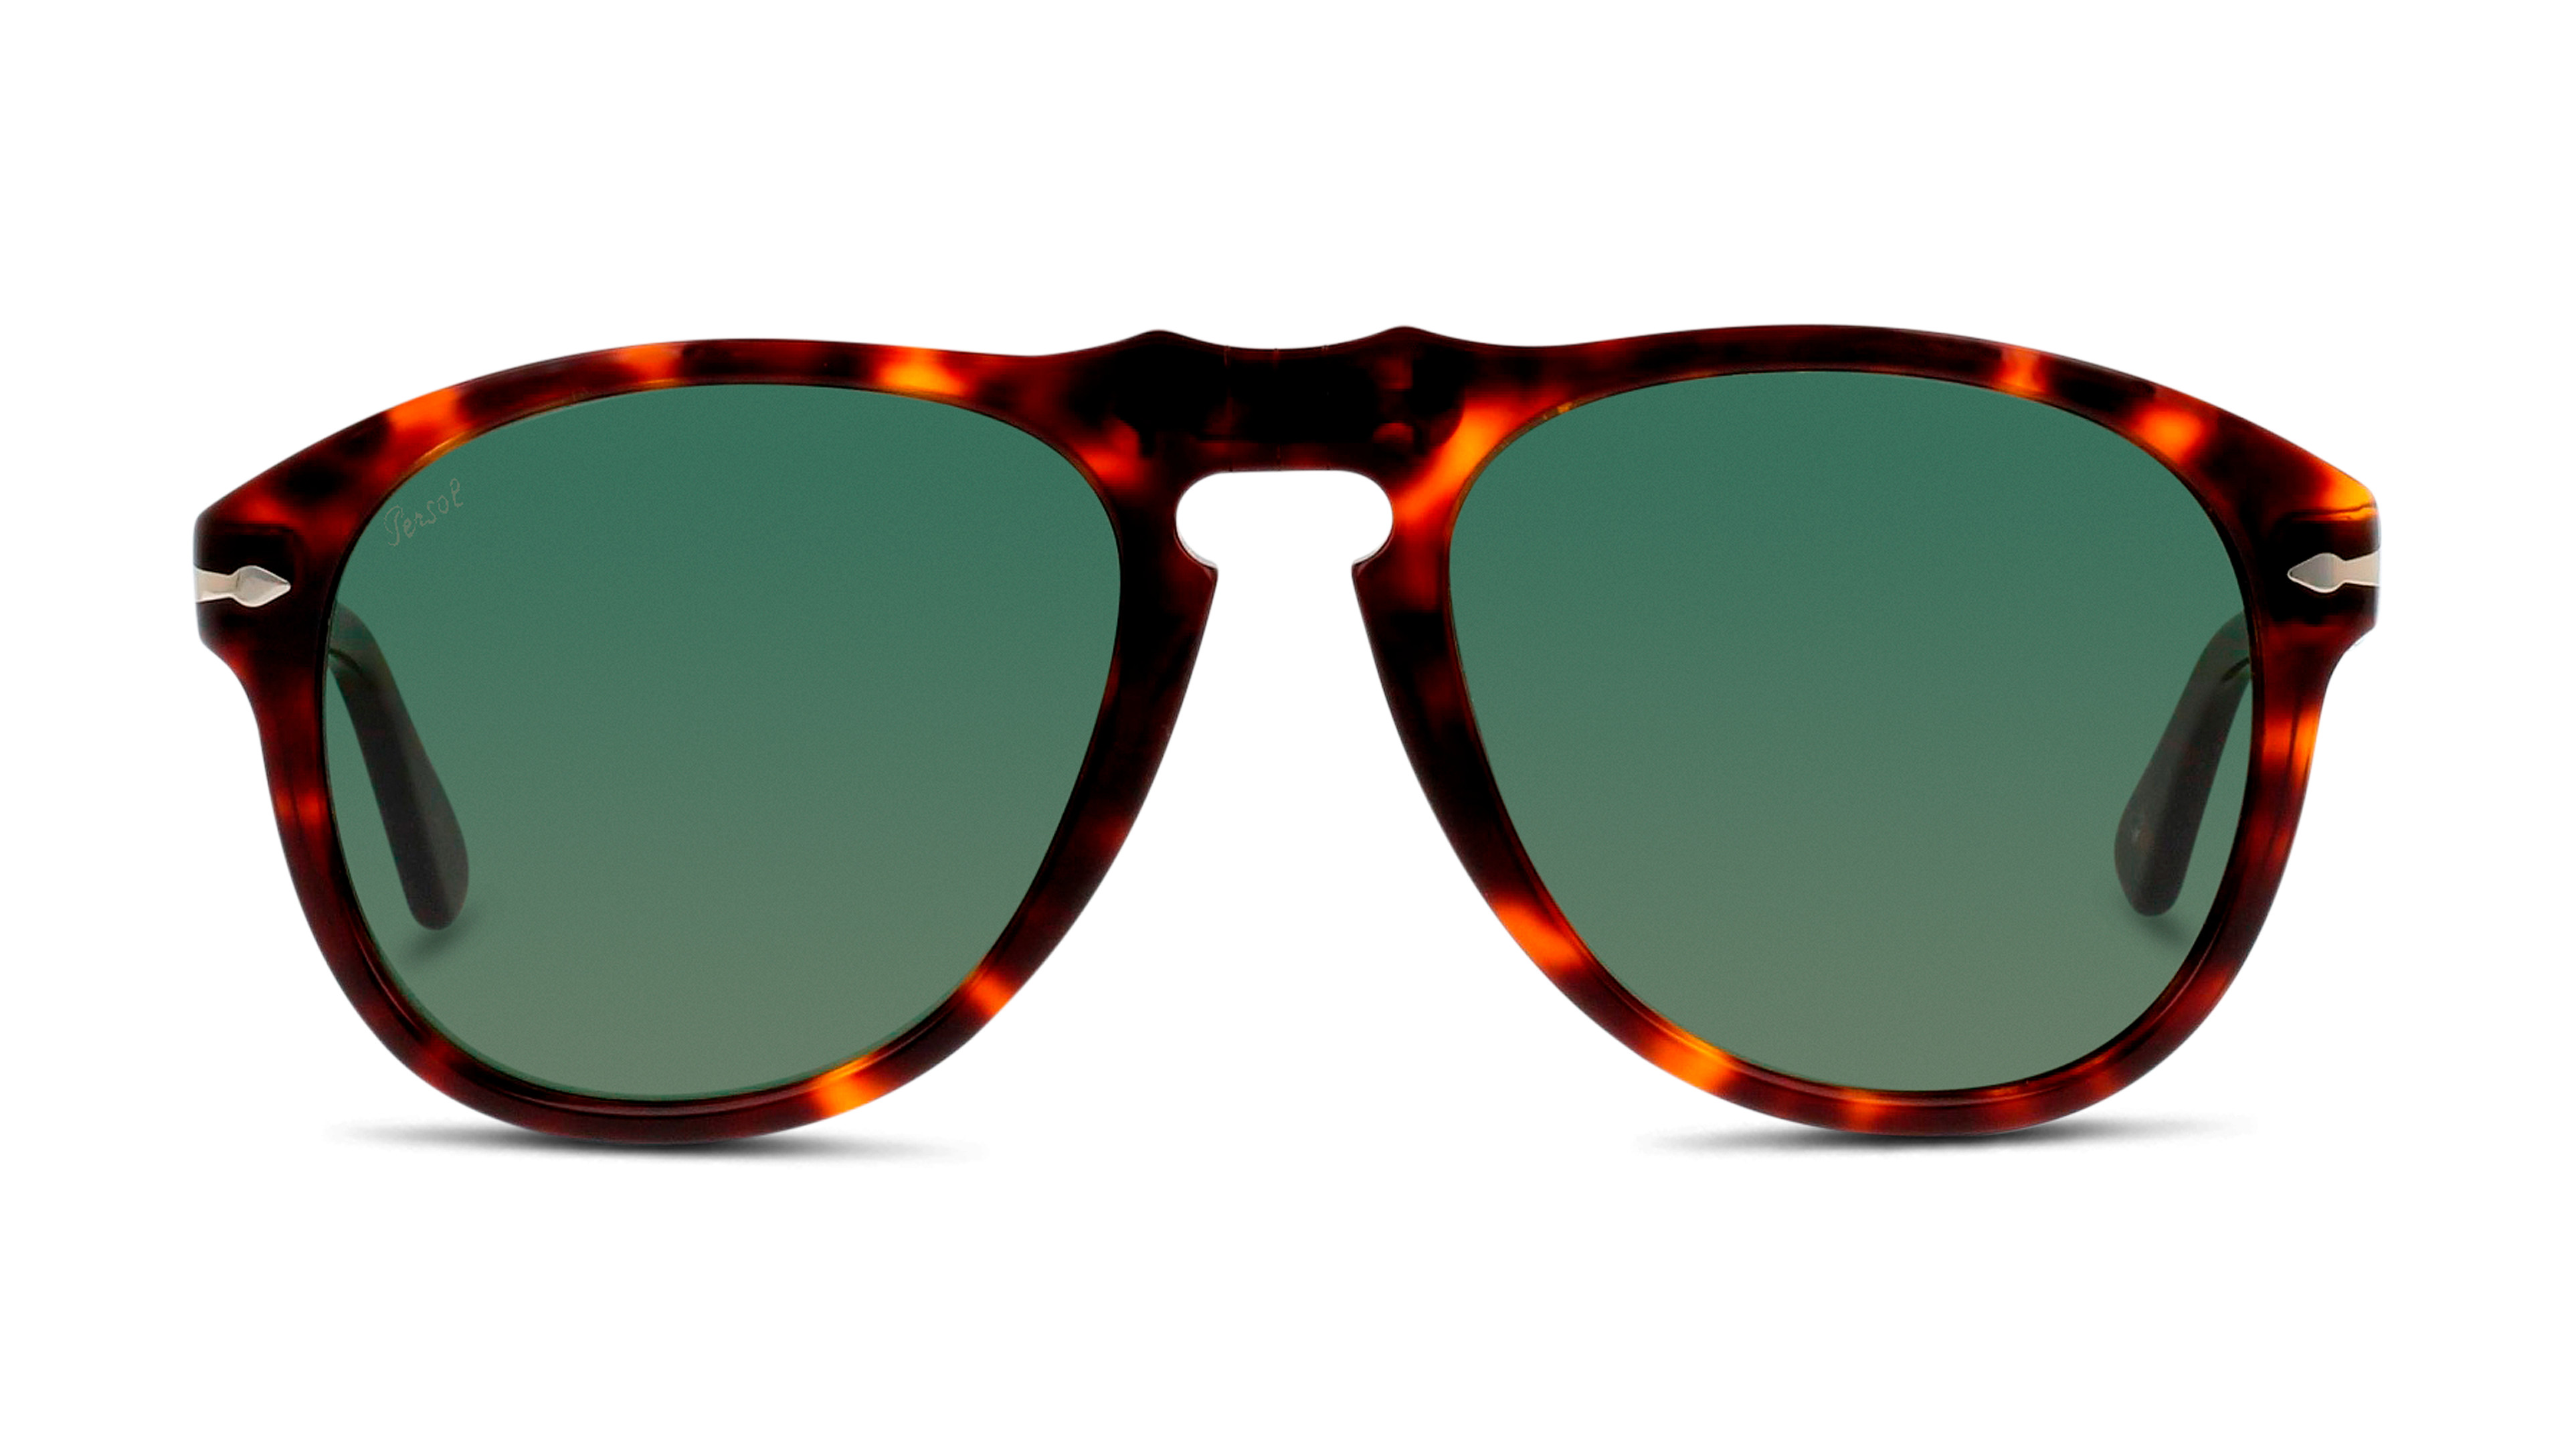 [products.image.front] Persol 0PO0649 24/31 Sonnenbrille